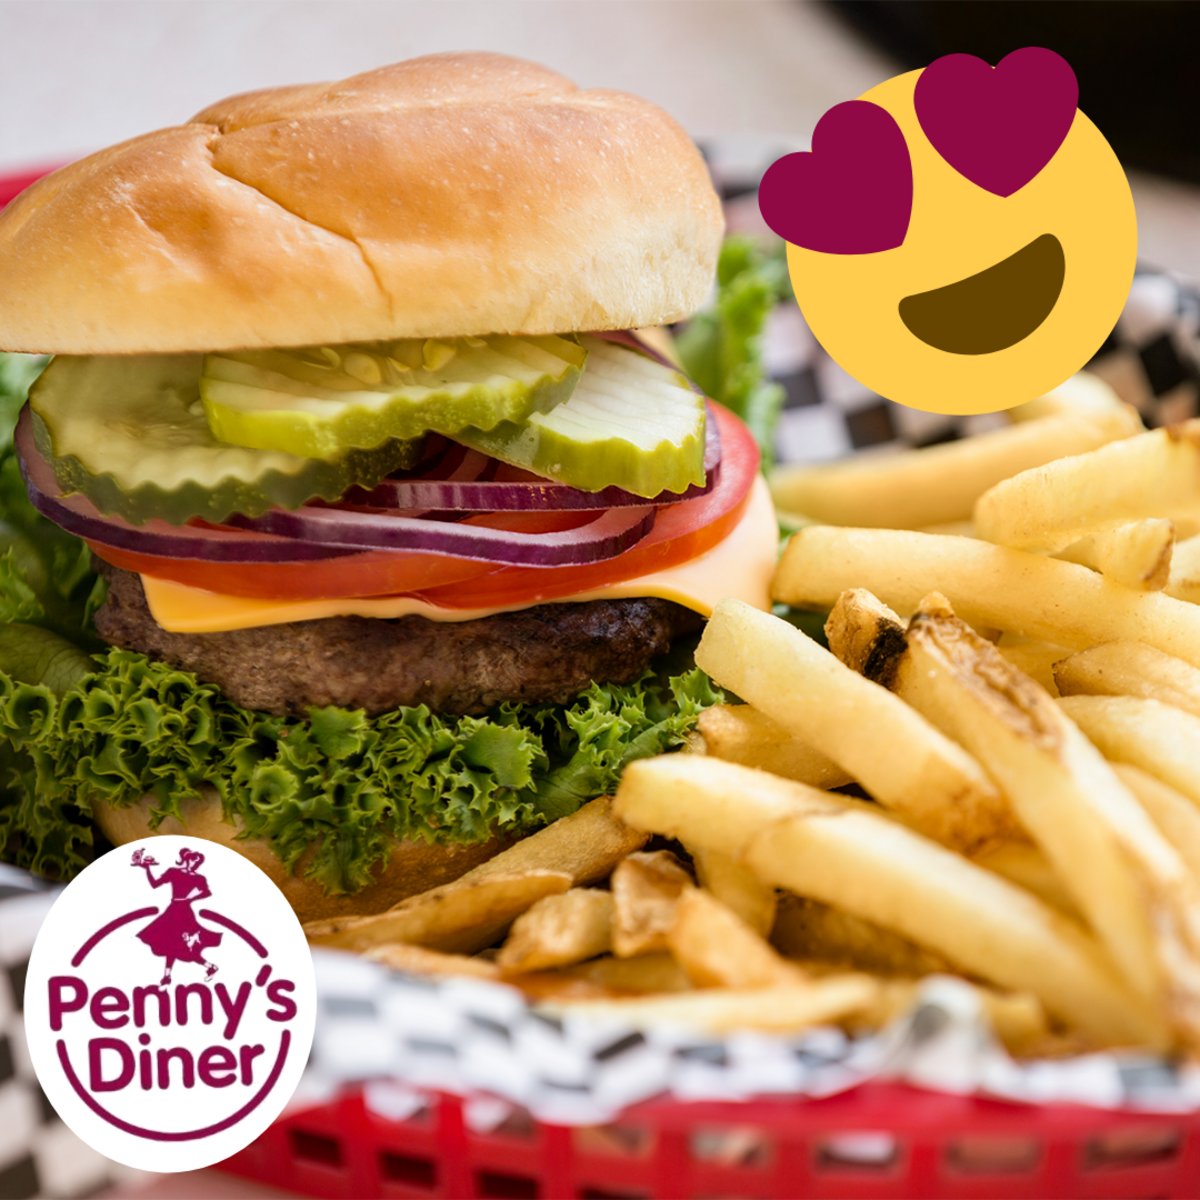 If you've got heart eyes for burgers and fries make your way to Penny's Diner Glenwood and get some today! 😍 #burgers #fries #diner #lunch #yum #food #MNfoodie